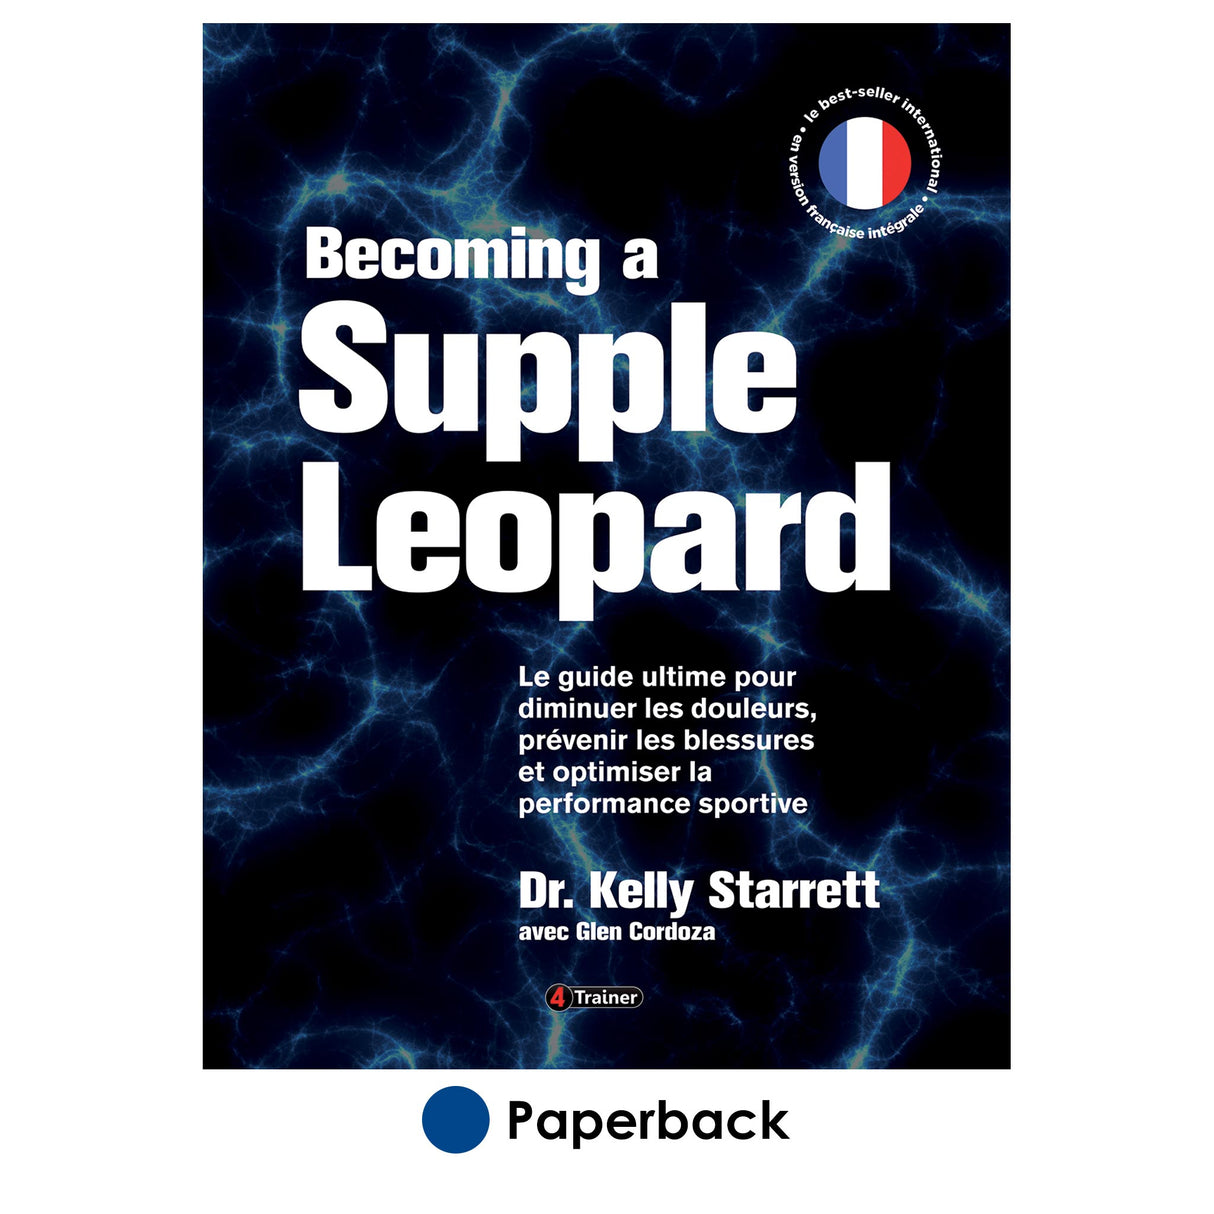 Becoming a supple leopard - Version Francais